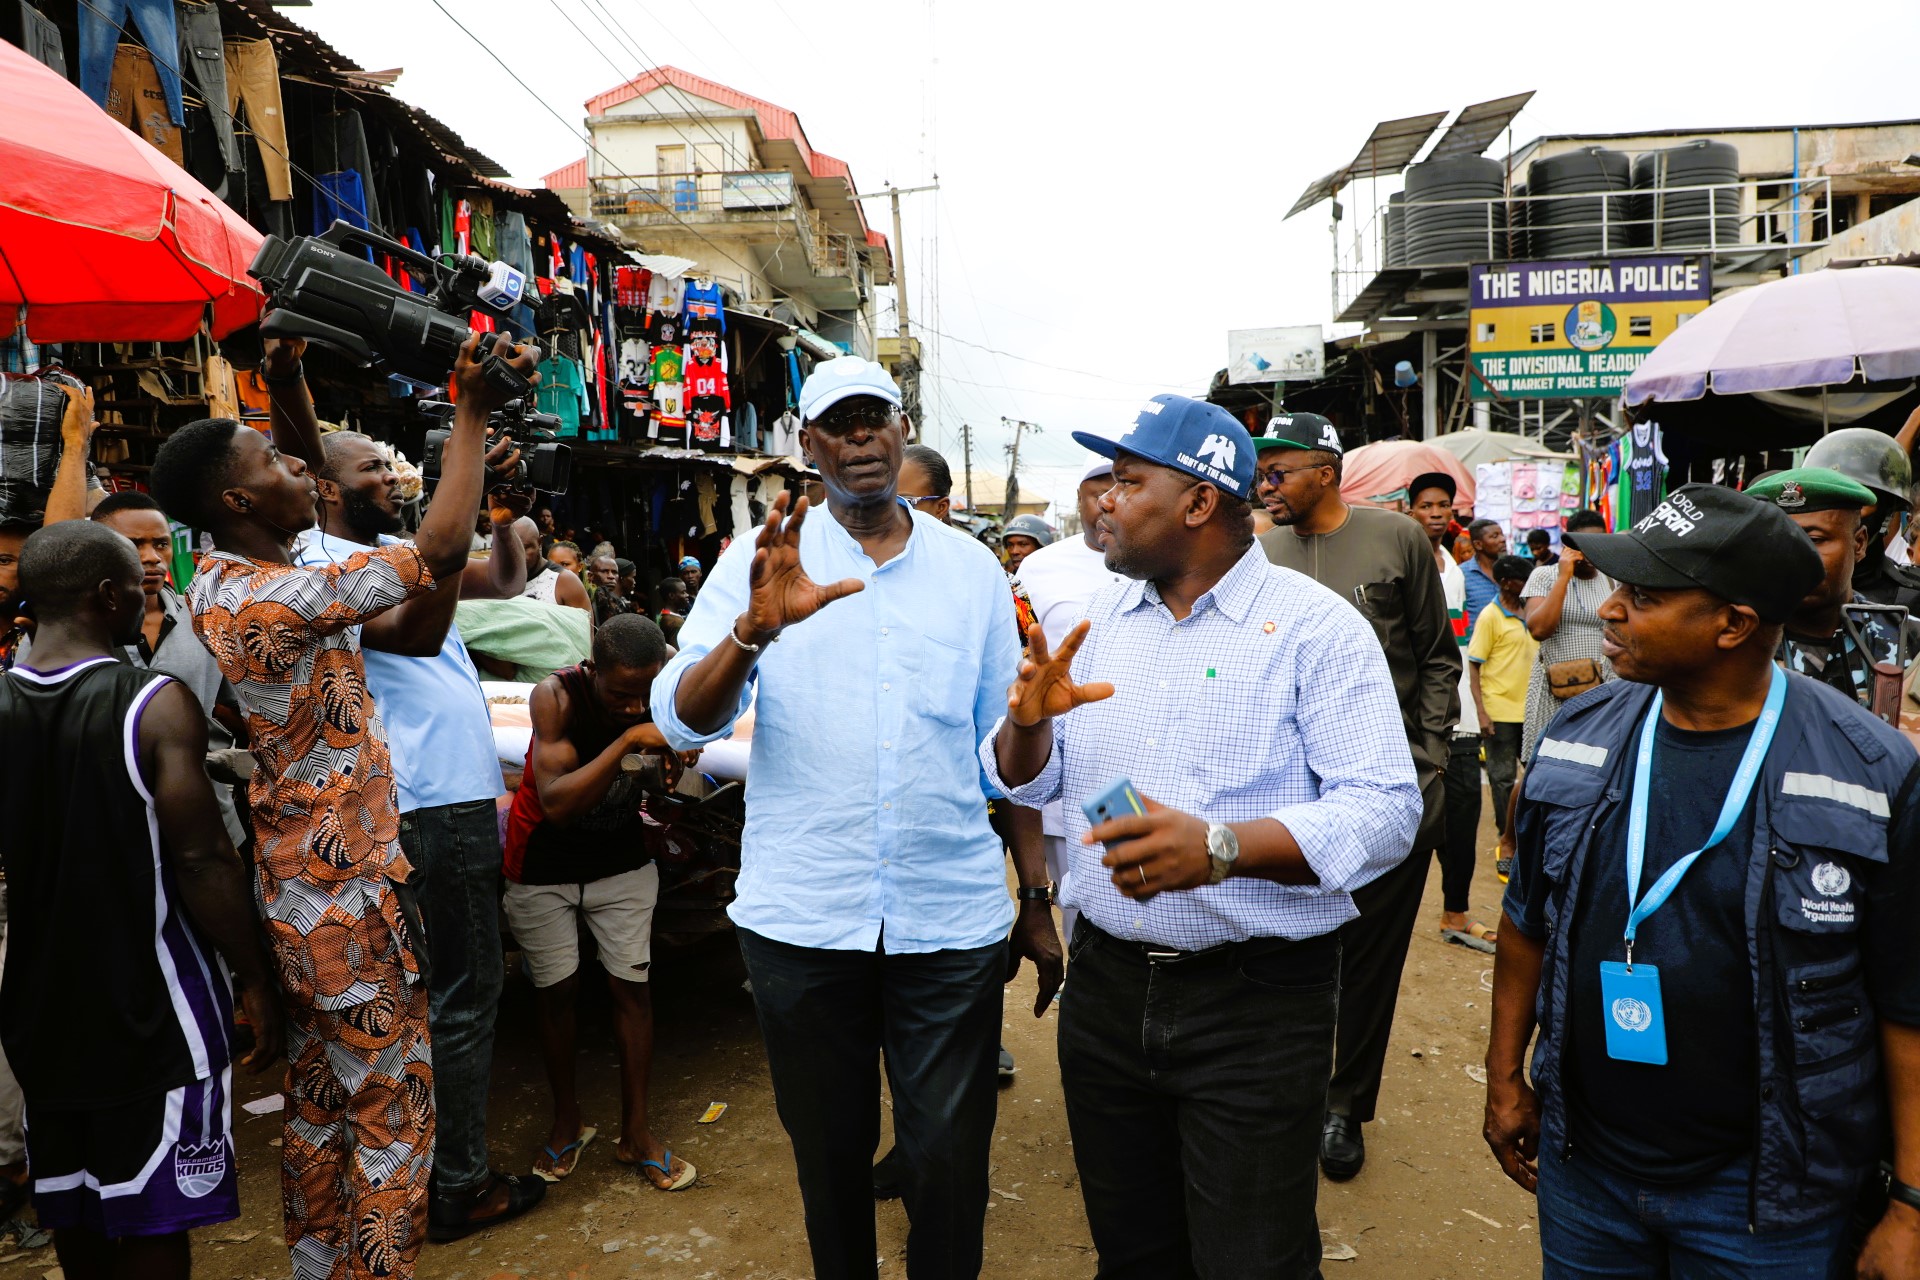 RC at Onitsha market: The UN Resident Coordinator in Nigeria, Mohammed Malick Fall (left) and Chief of Staff to Anambra State Governor, Mr. Ernest Ezeajughi (Right) at the Onitsha market.